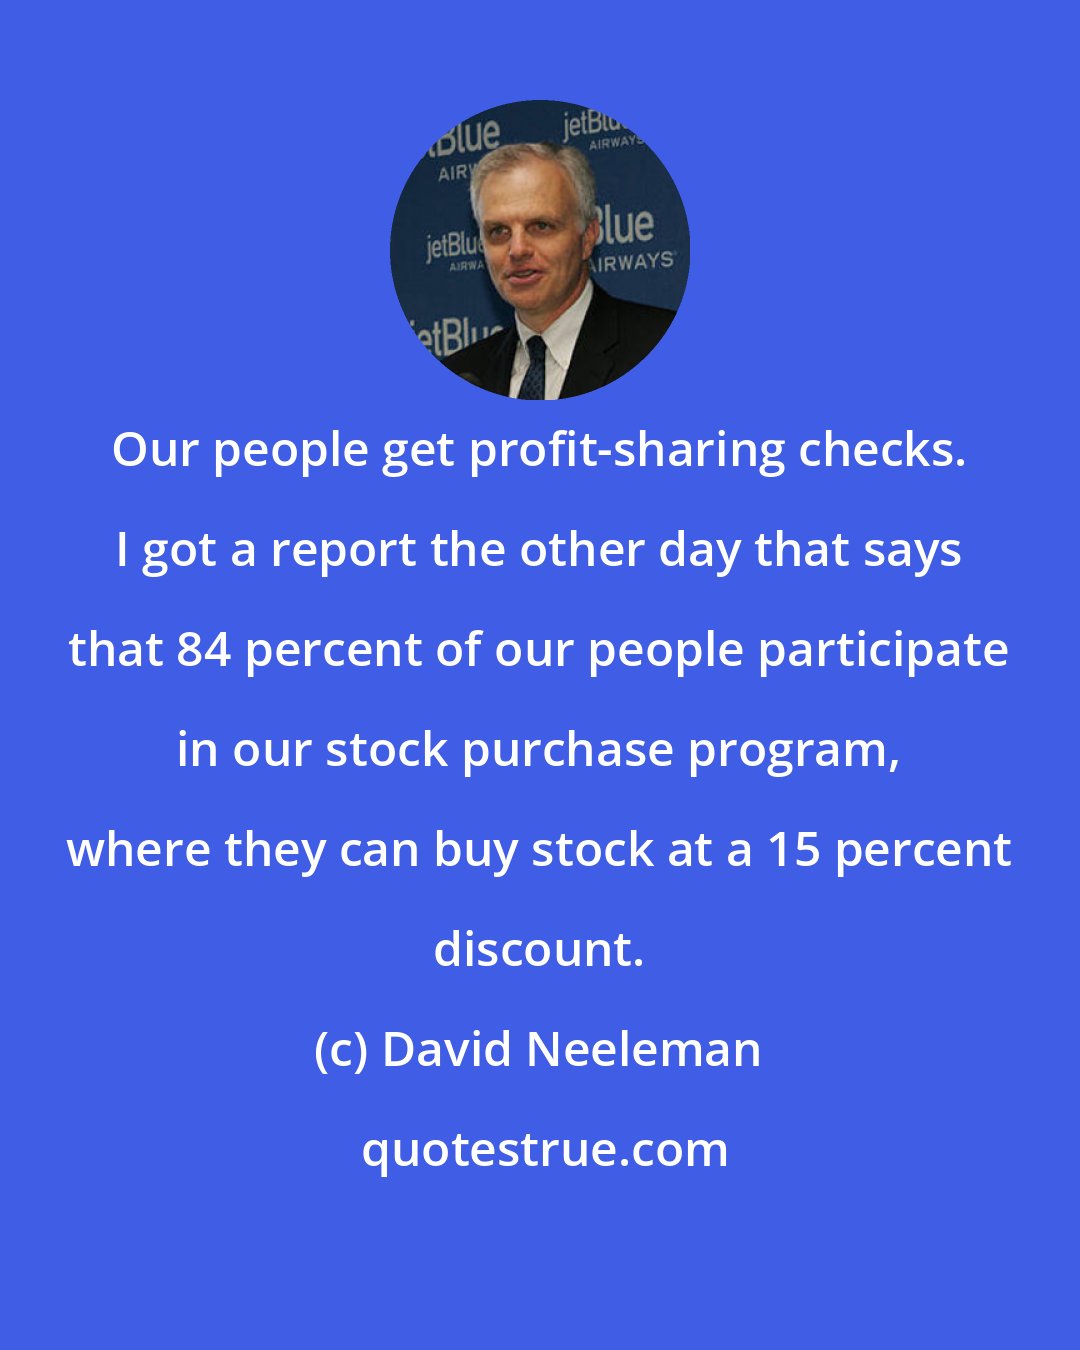 David Neeleman: Our people get profit-sharing checks. I got a report the other day that says that 84 percent of our people participate in our stock purchase program, where they can buy stock at a 15 percent discount.